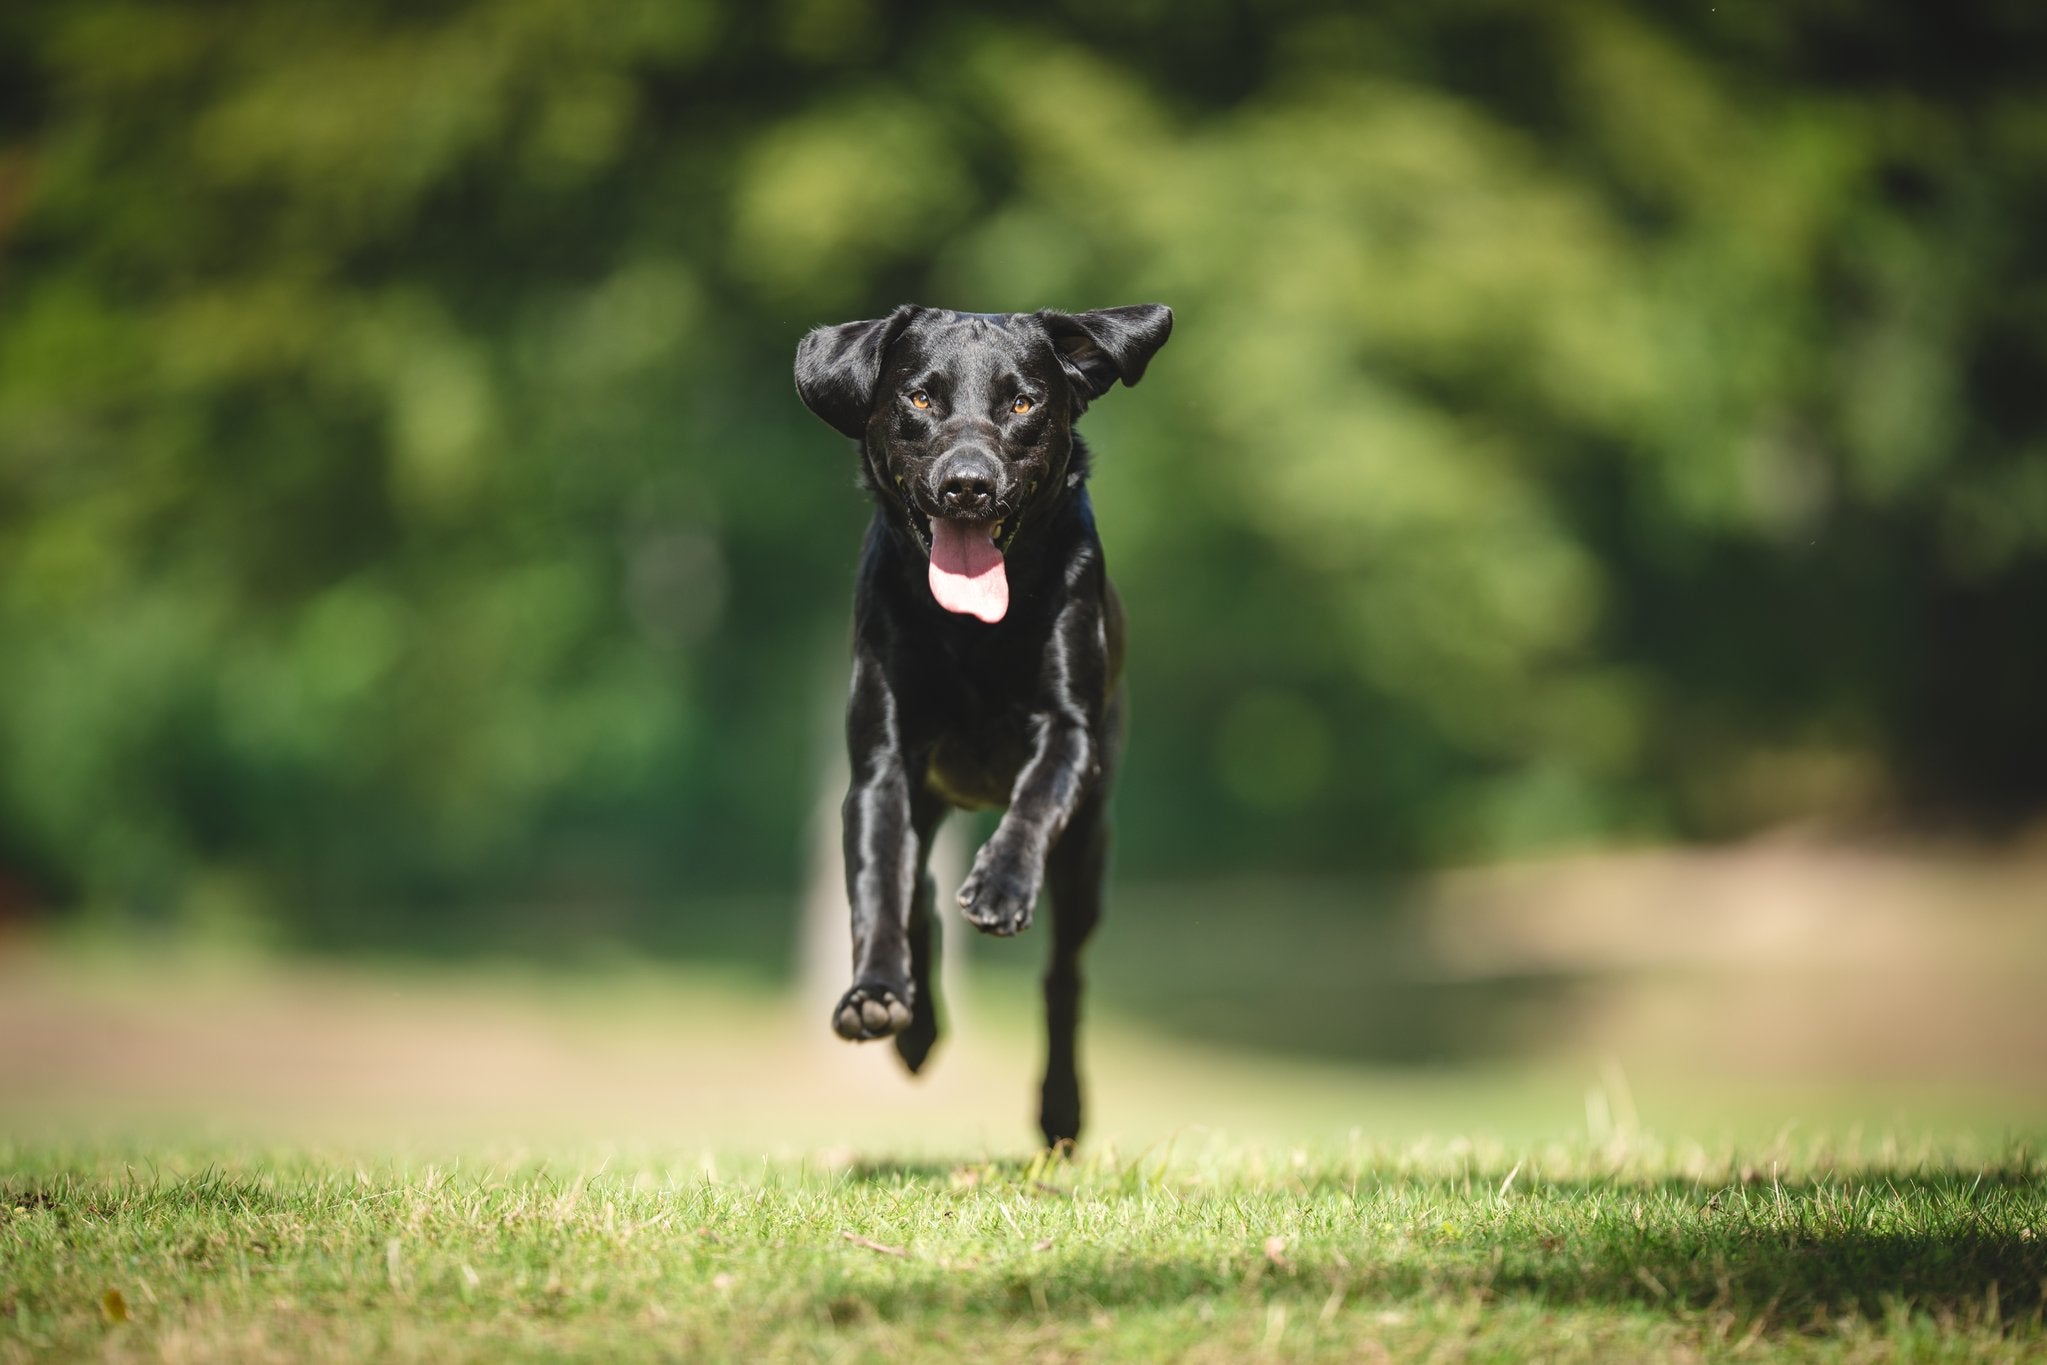 What are the benefits of YuMOVE for your dog?